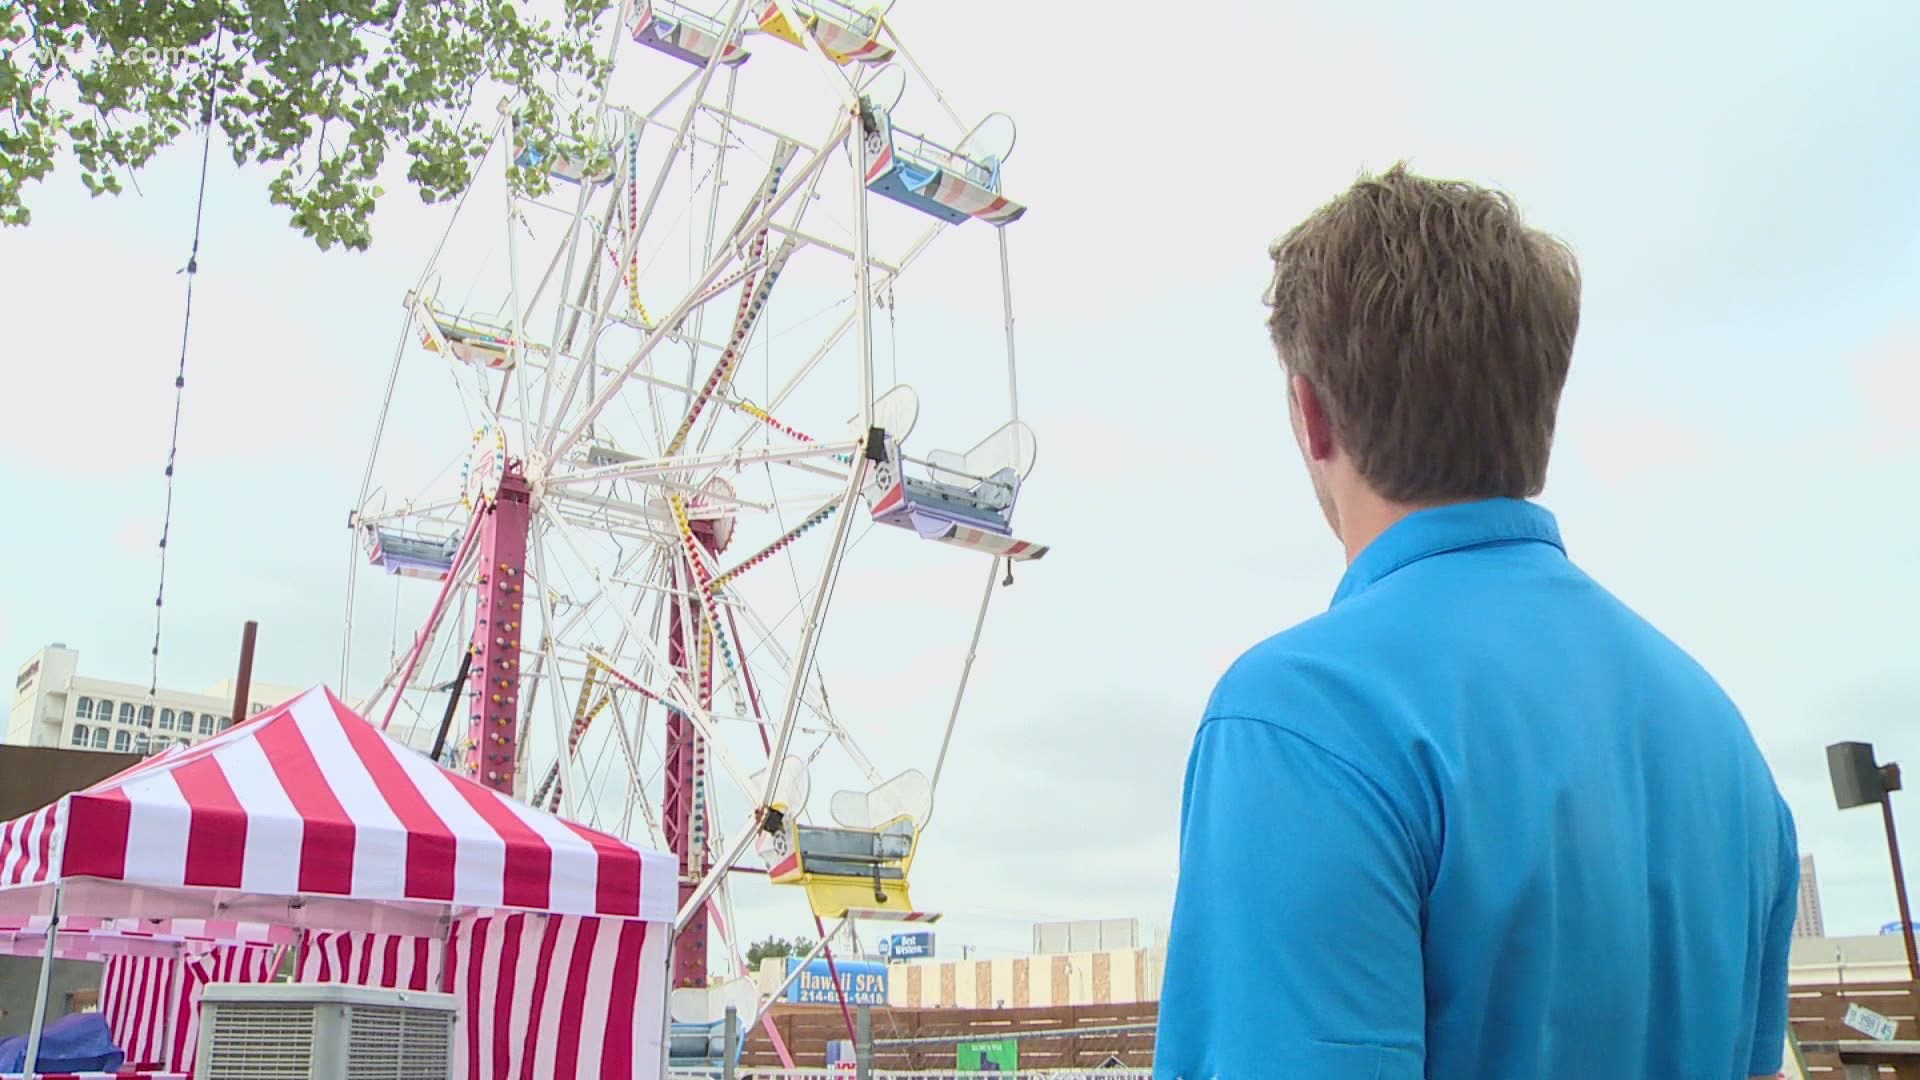 Ferris Wheelers is operating a state fair pop-up through the end of October. Here's a look at the set-up.